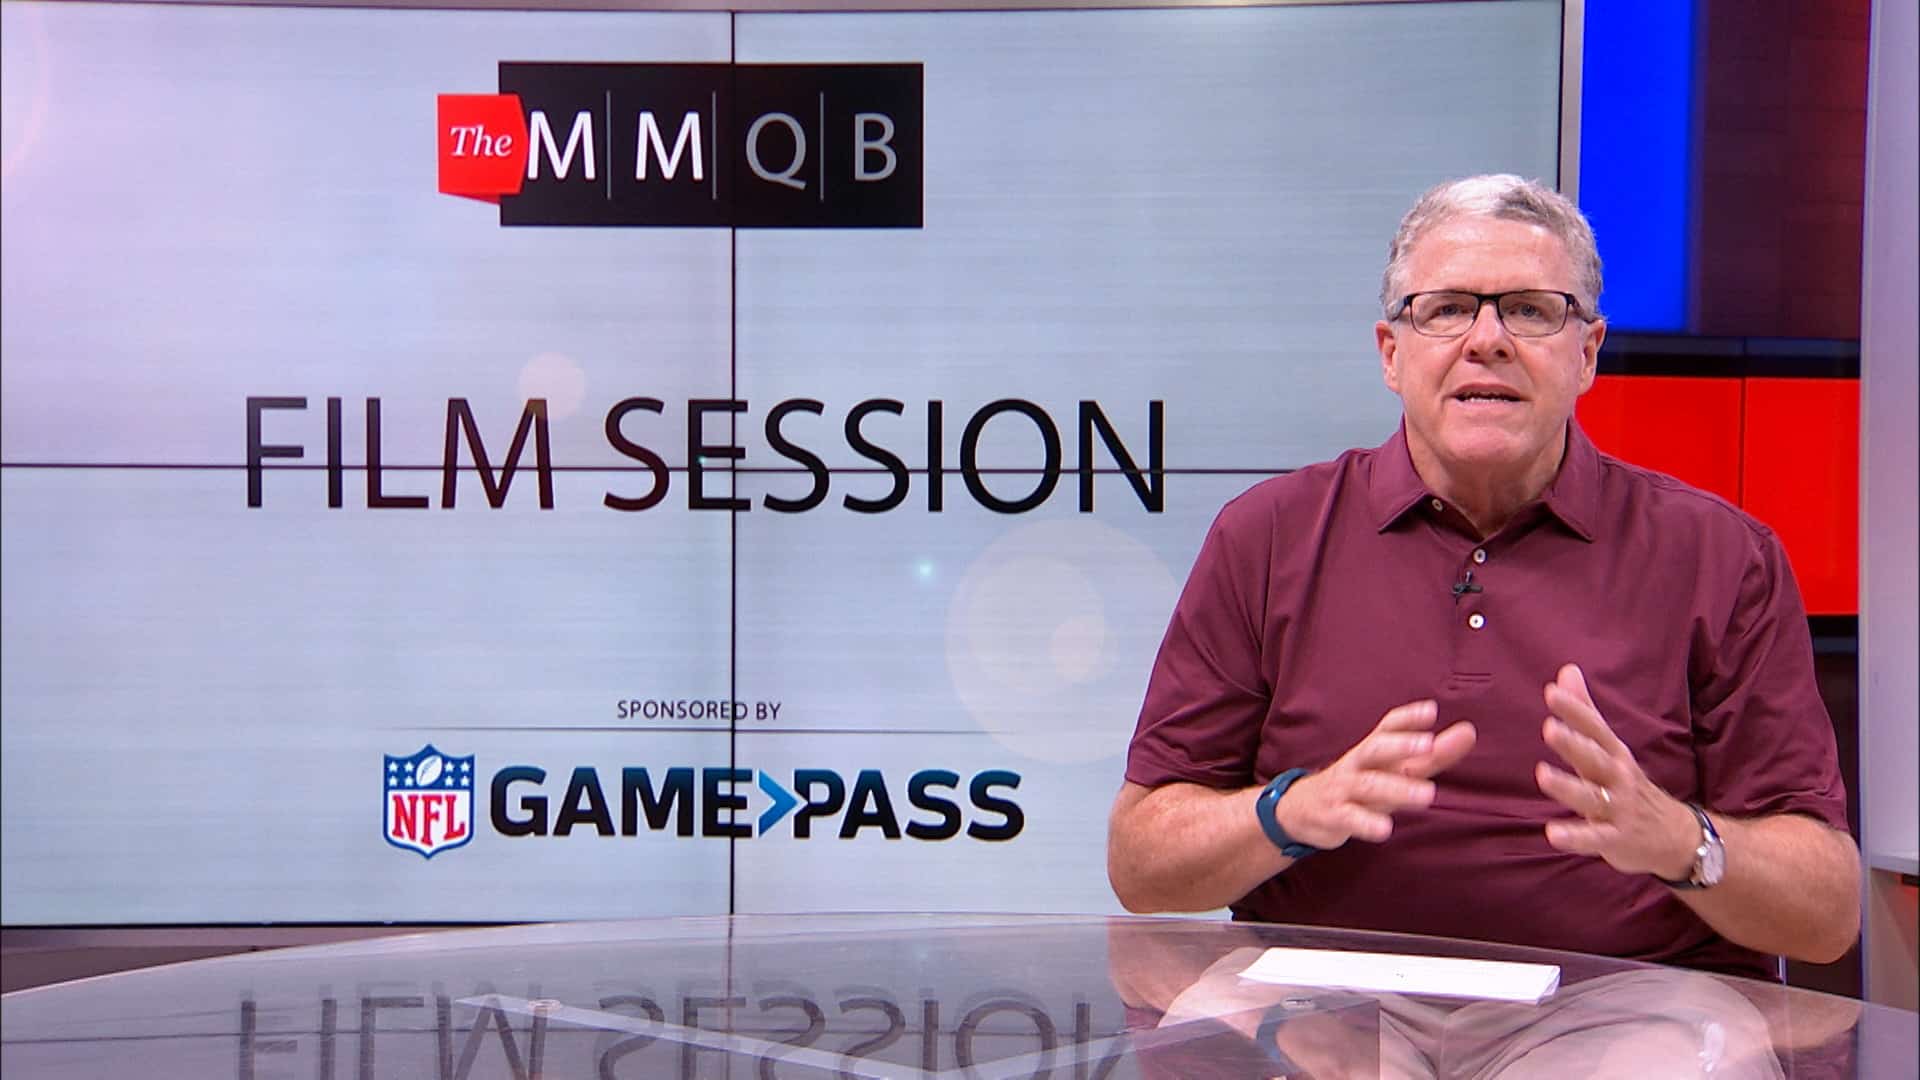 nfl game pass film session